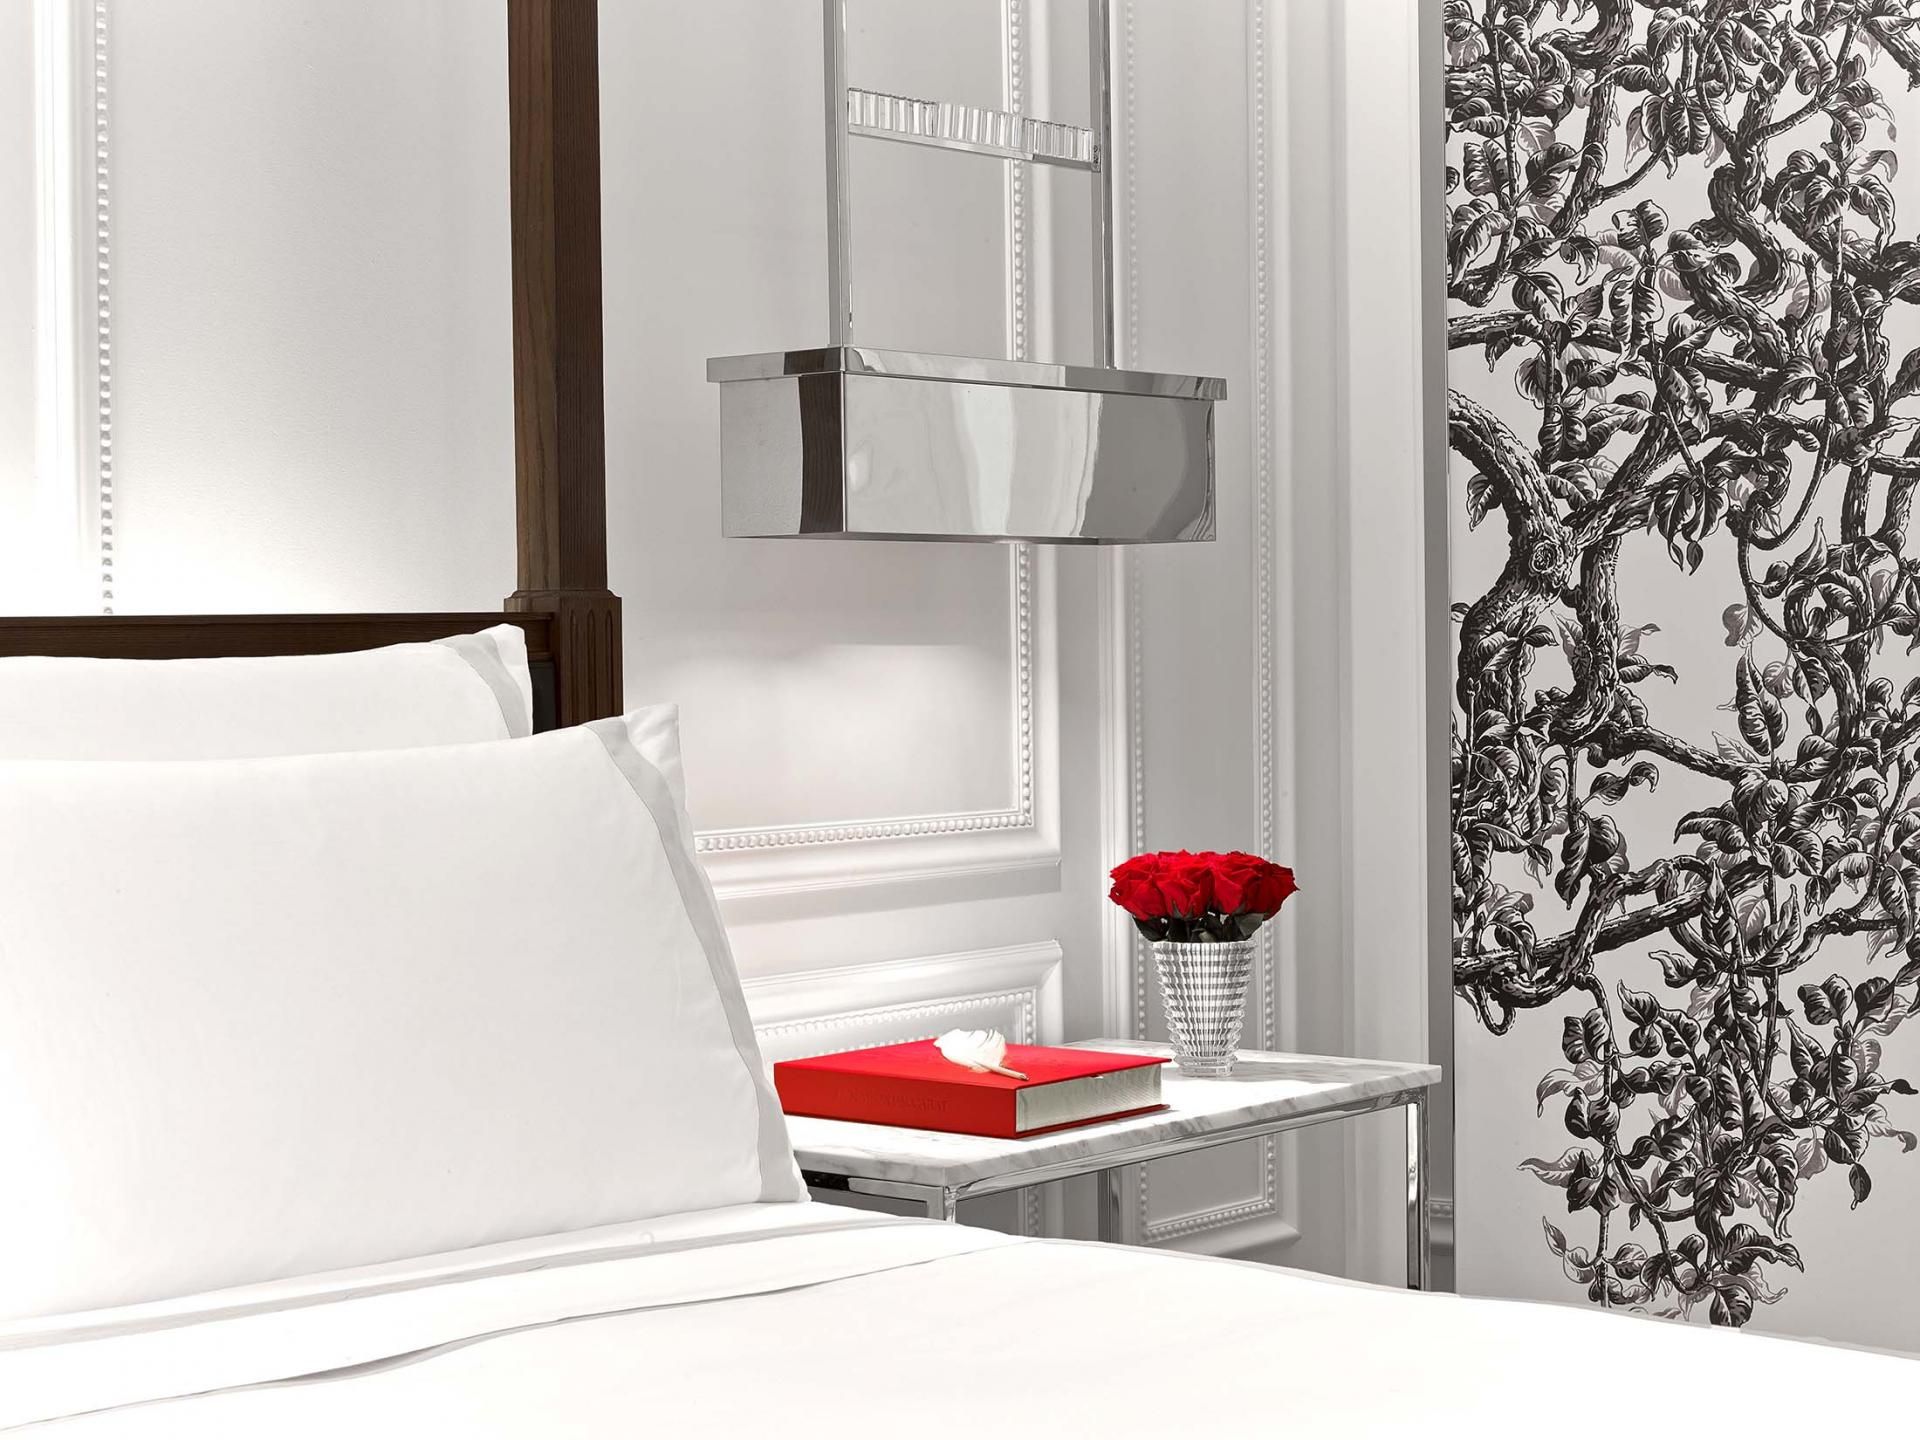 Baccarat hotel room bed side table with red roses